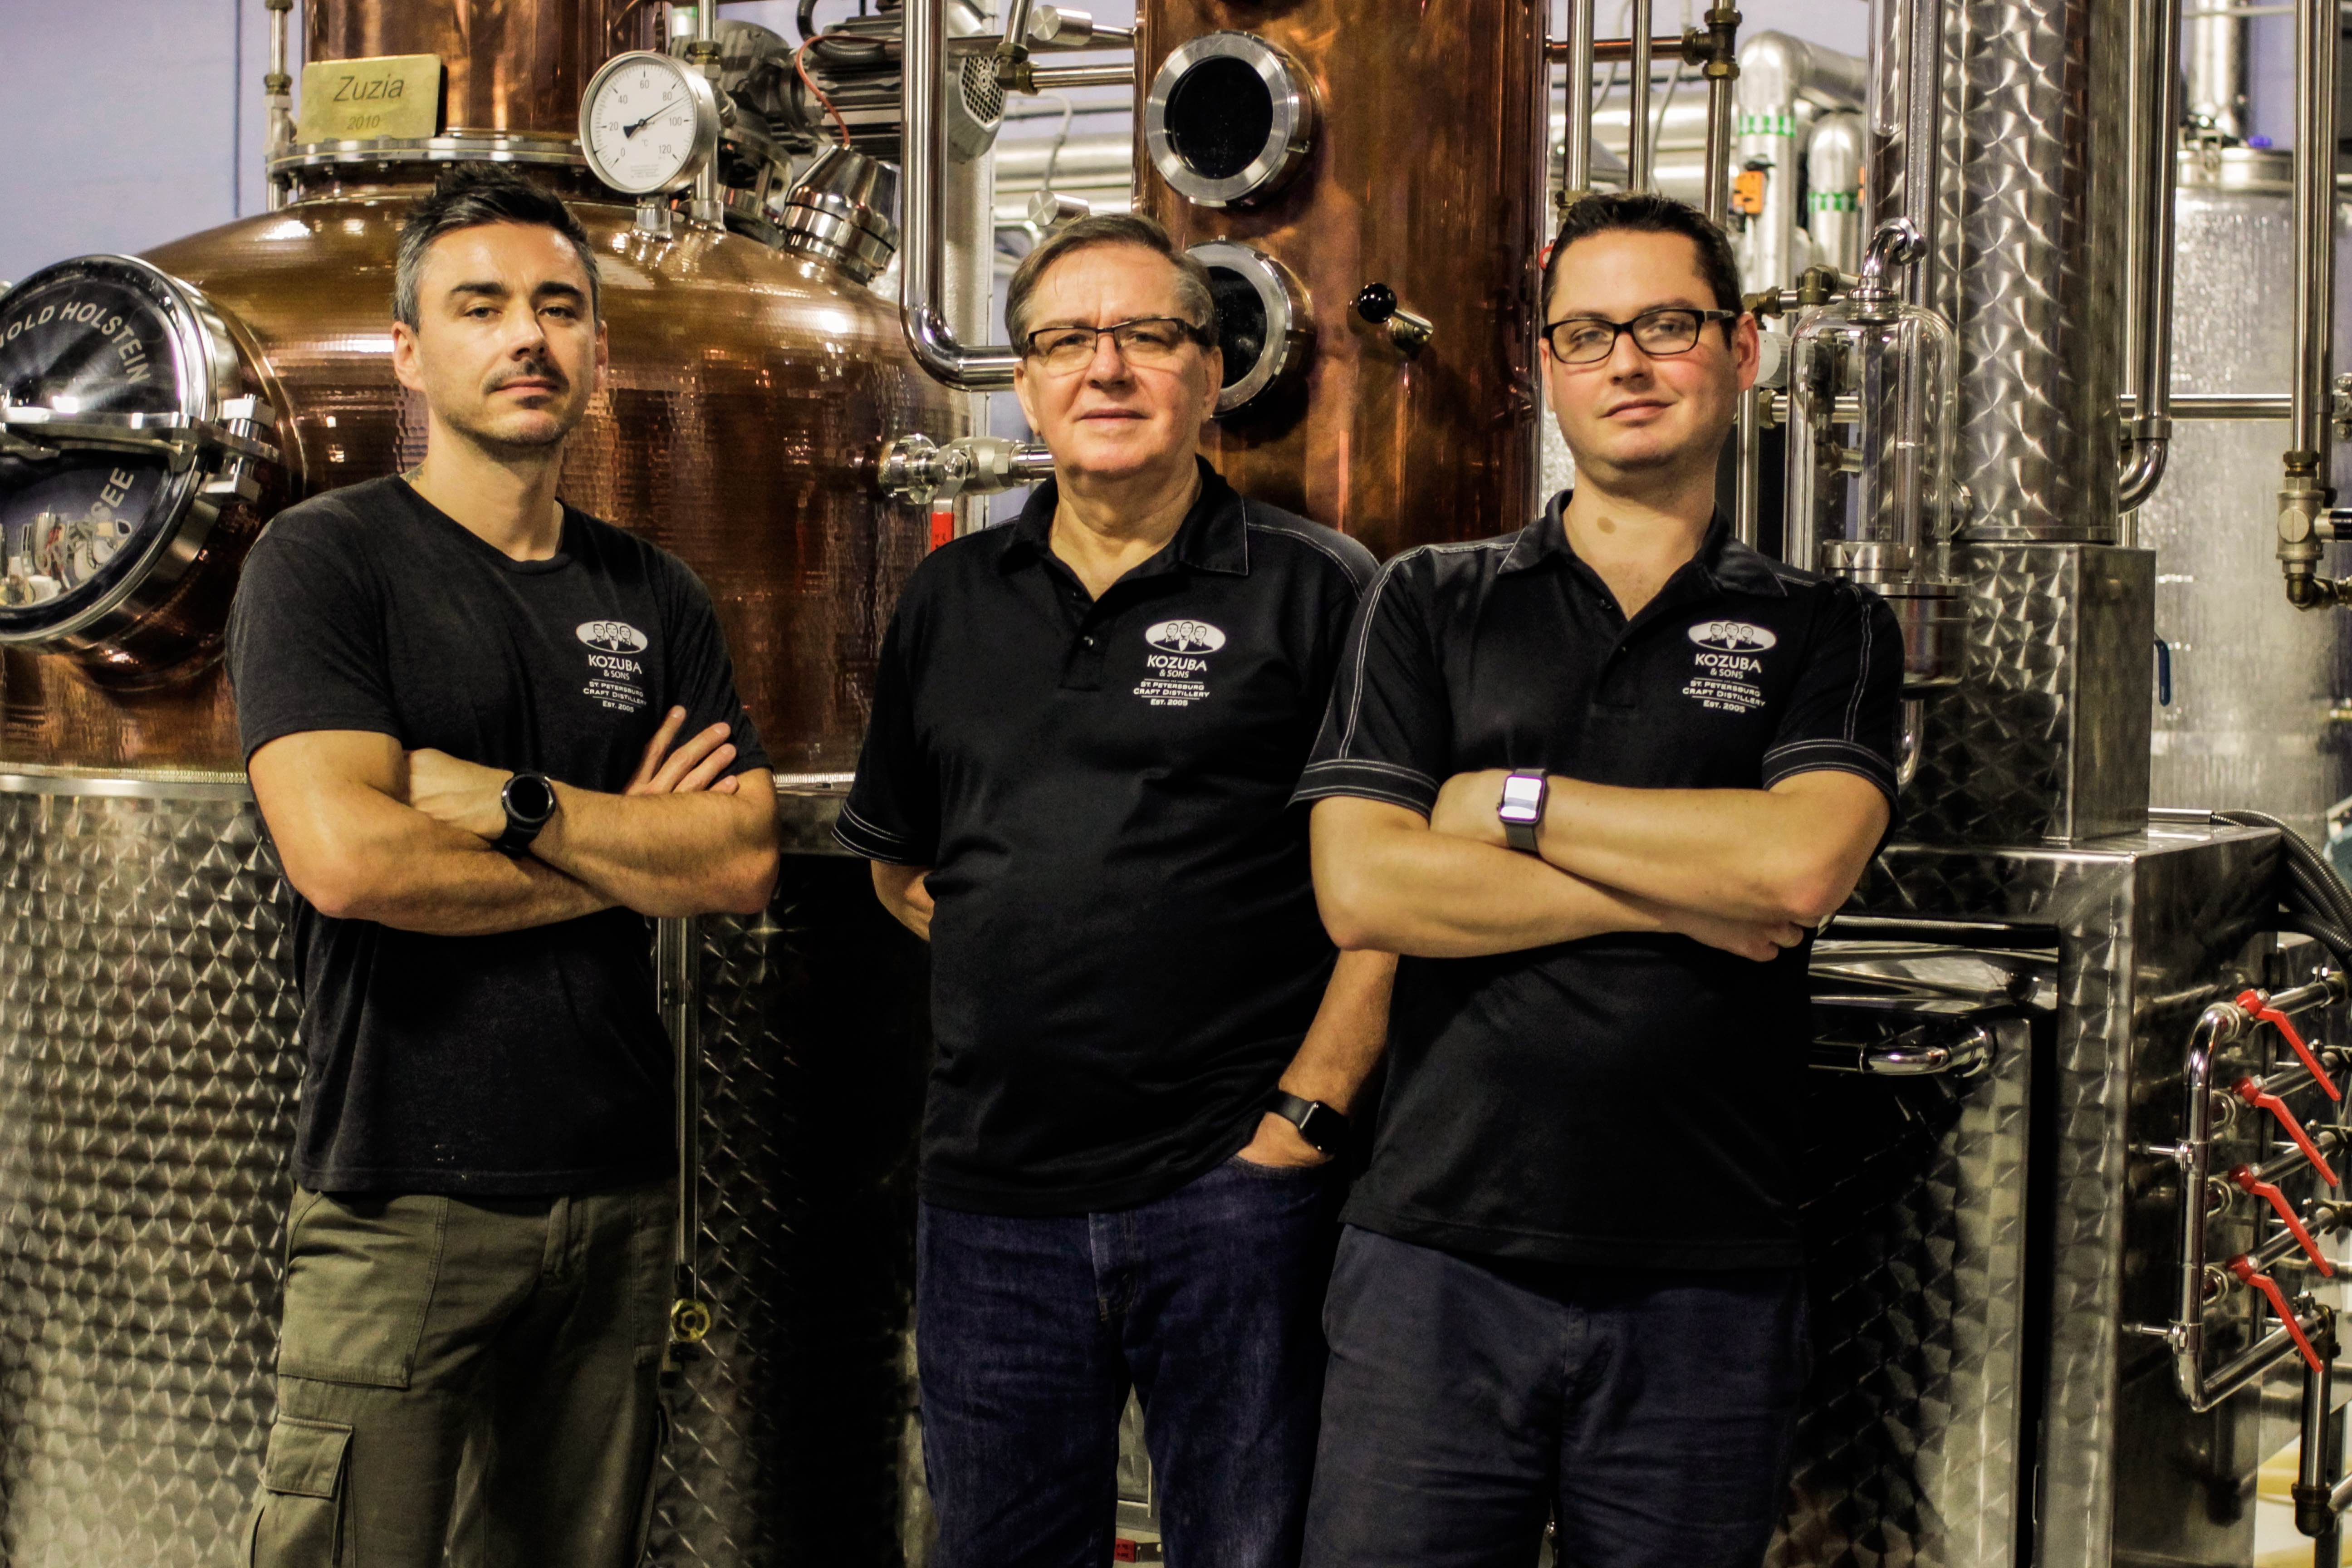 The Kozuba family began their humble distillation journey in Poland when Zbigniew “Papa” Kozuba, now Founder and Master Distiller, was tinkering with traditional Polish cordials.